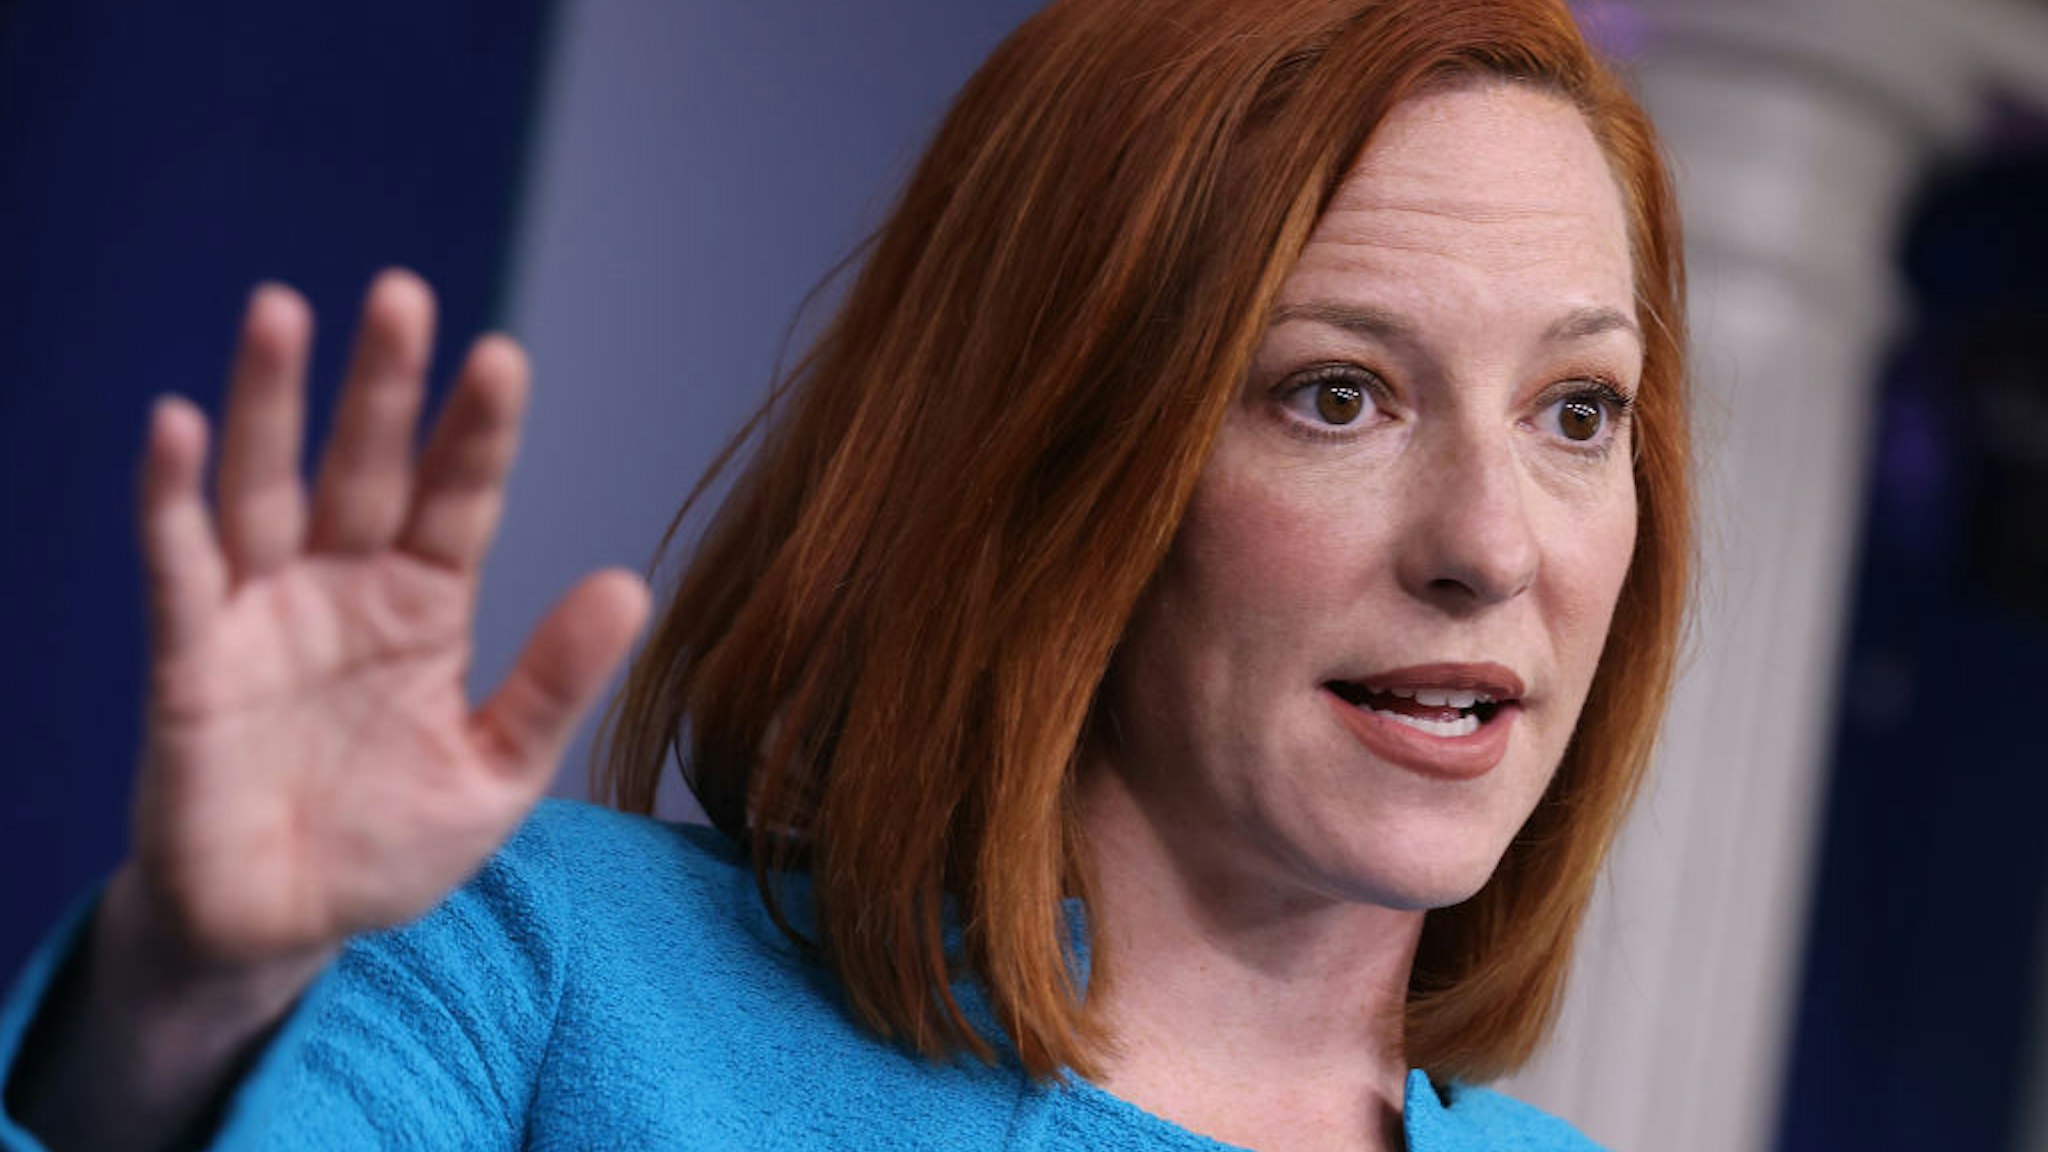 White House Press Secretary Jen Psaki talks to reporters during her daily news conference in the Brady Press Briefing room at the White House on March 22, 2021 in Washington, DC.